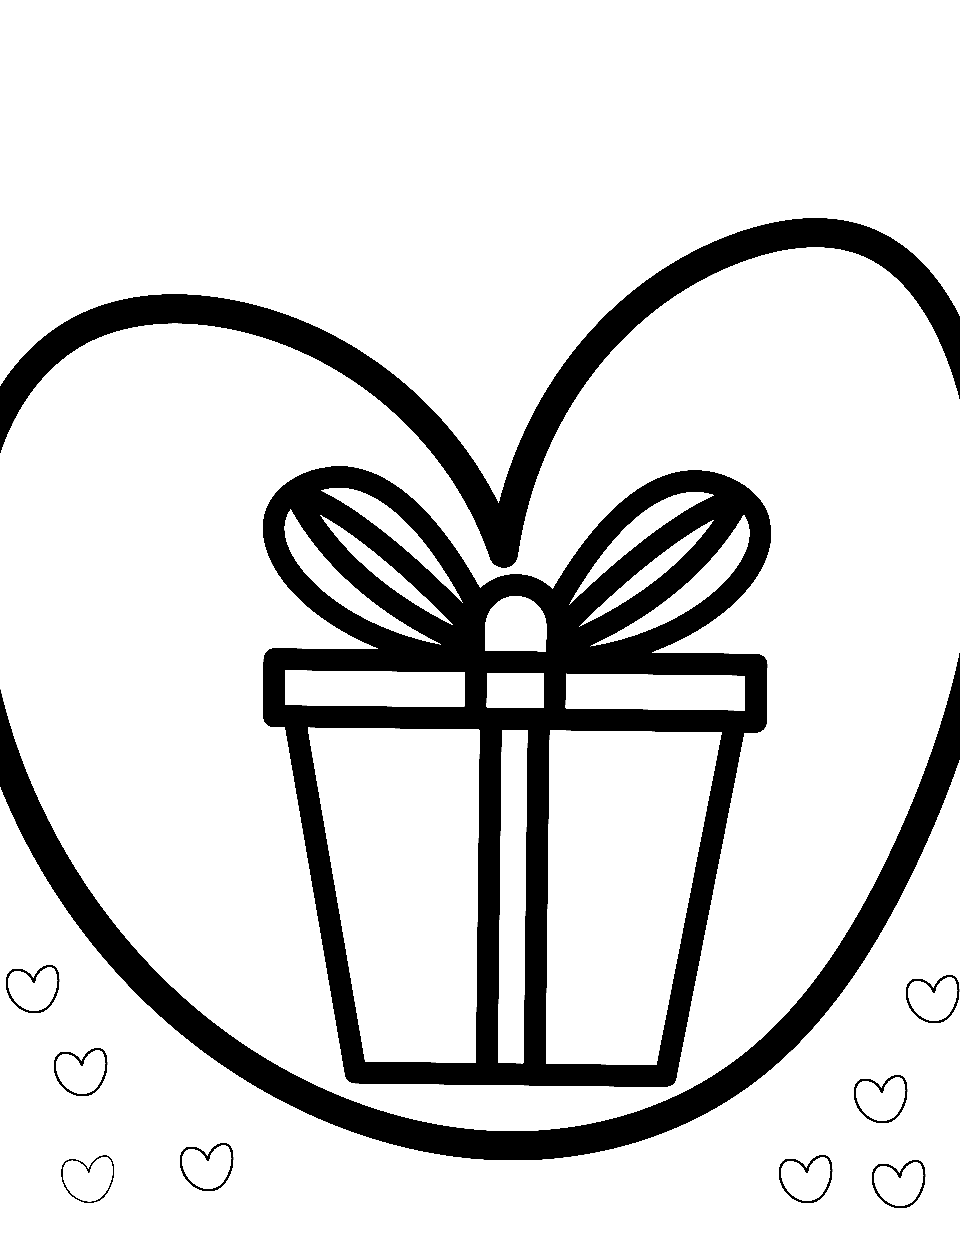 Gift Box Surprise Coloring Page - A gift box with a big bow and a big heart sticker behind it.